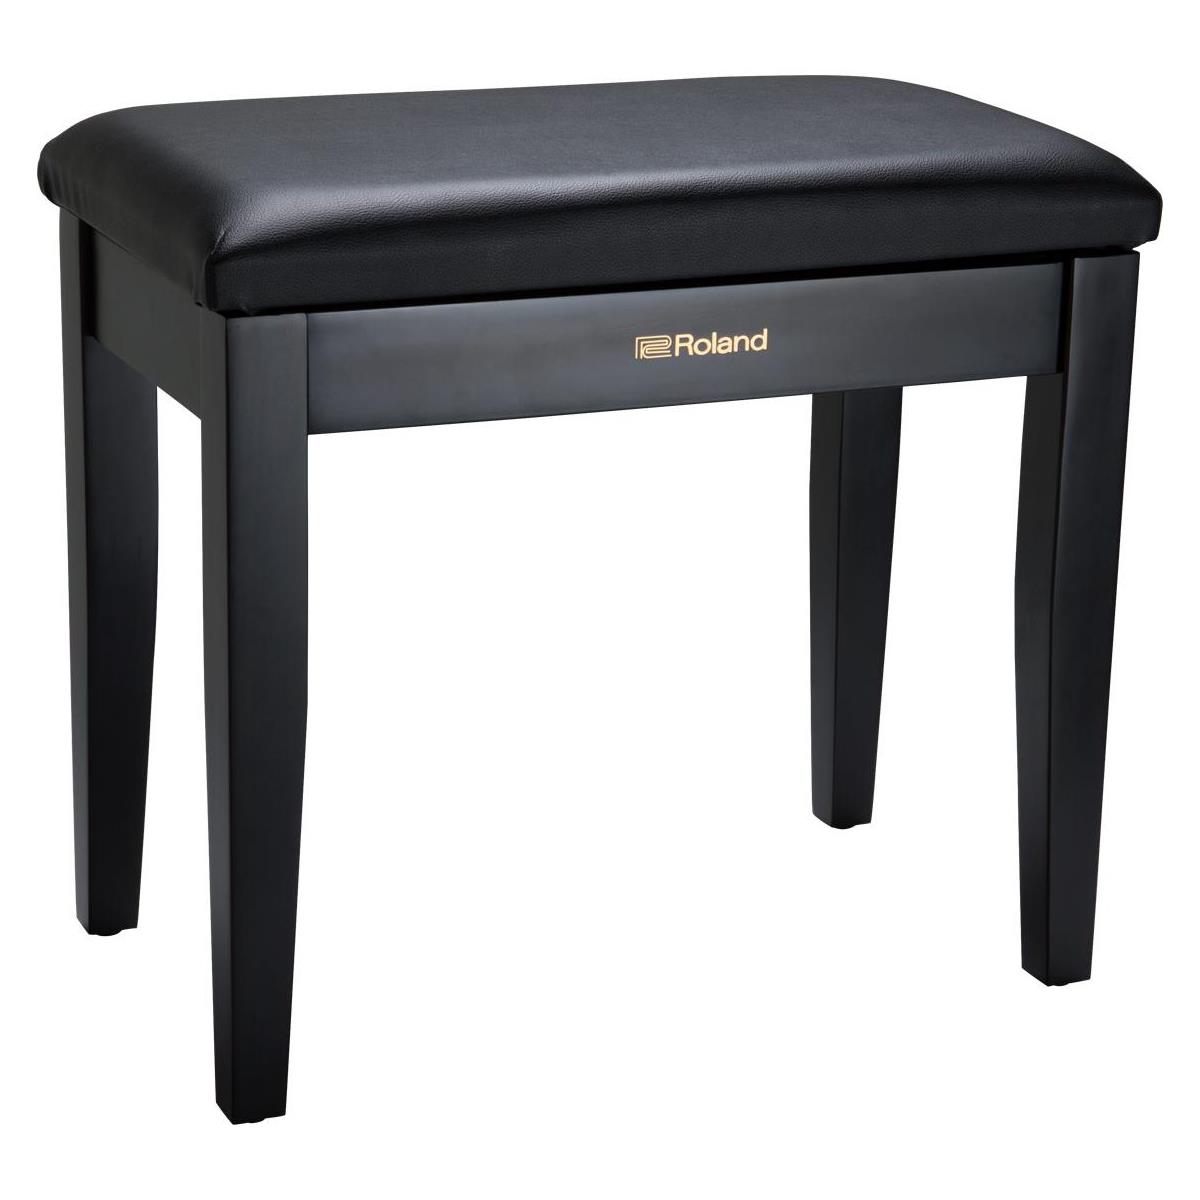 Image of Roland Piano Bench with Cushioned Seat and Storage Compartment